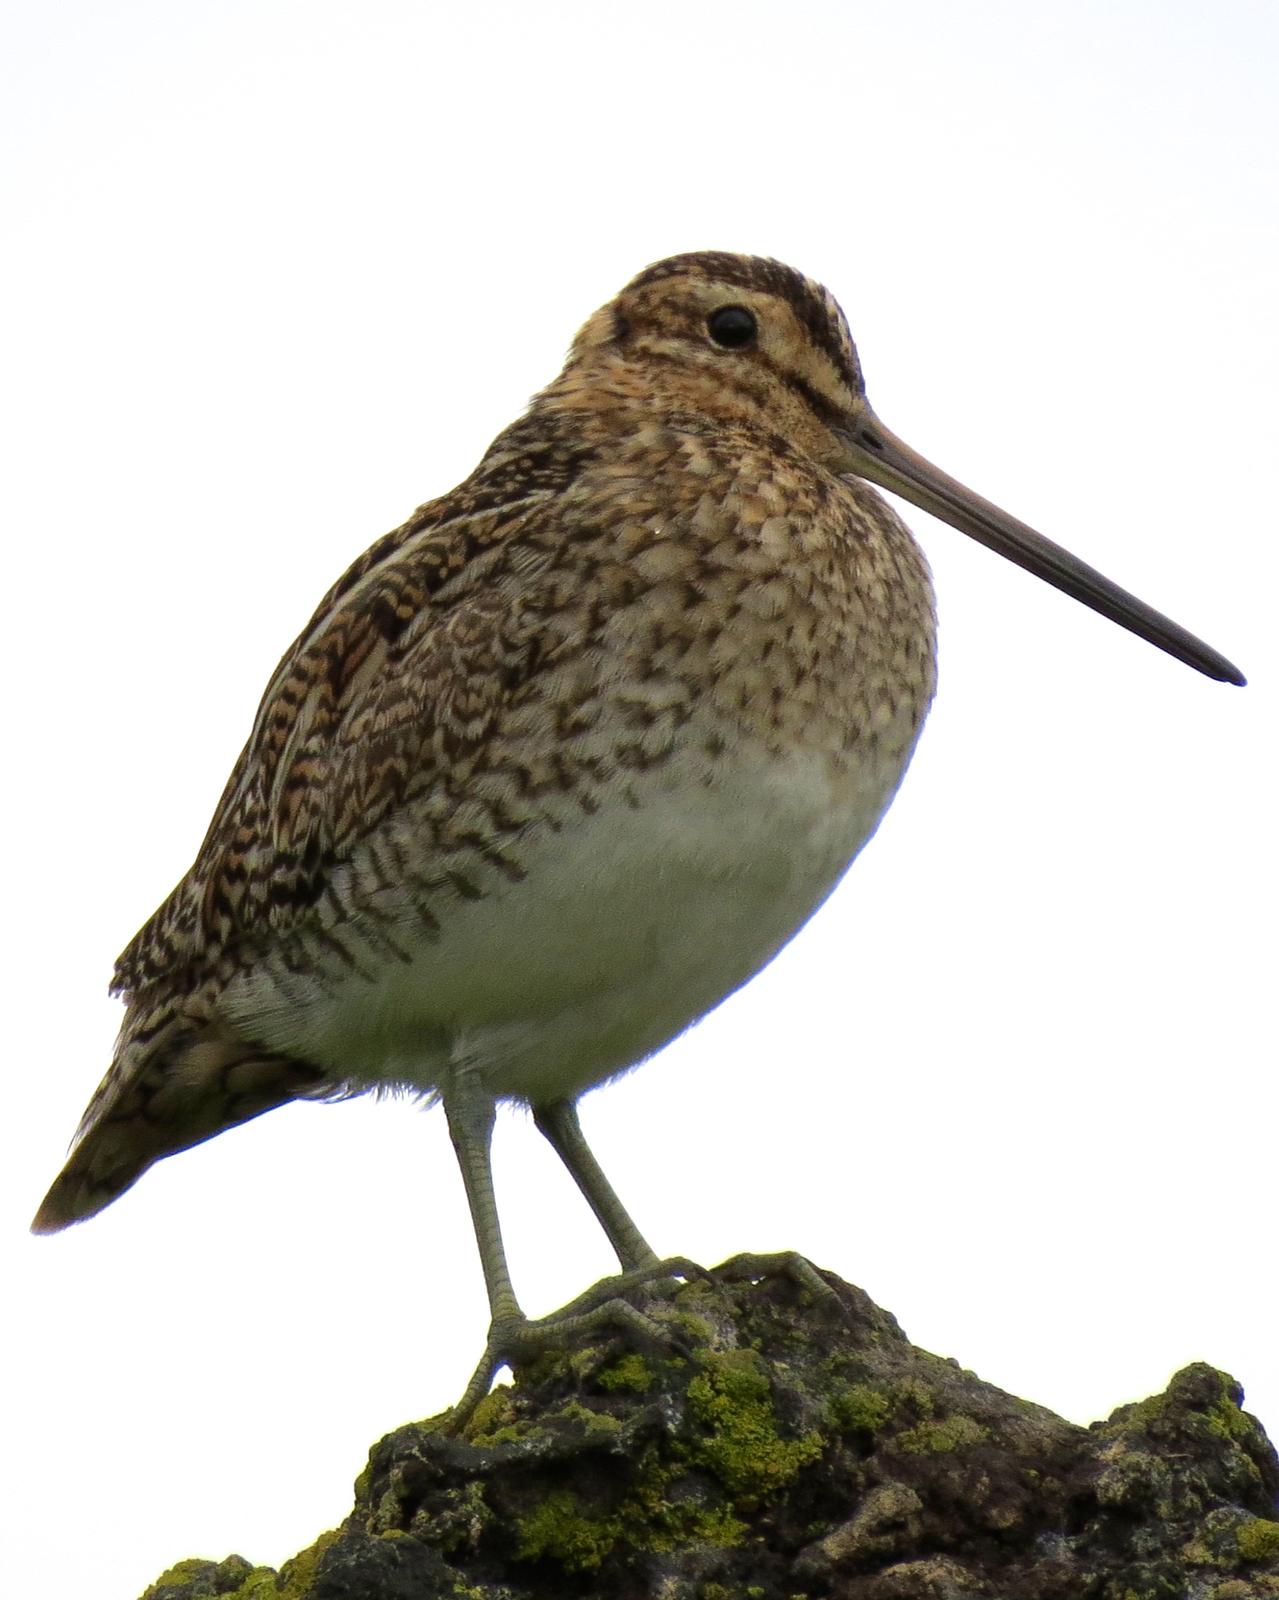 Common Snipe Photo by Robin Barker